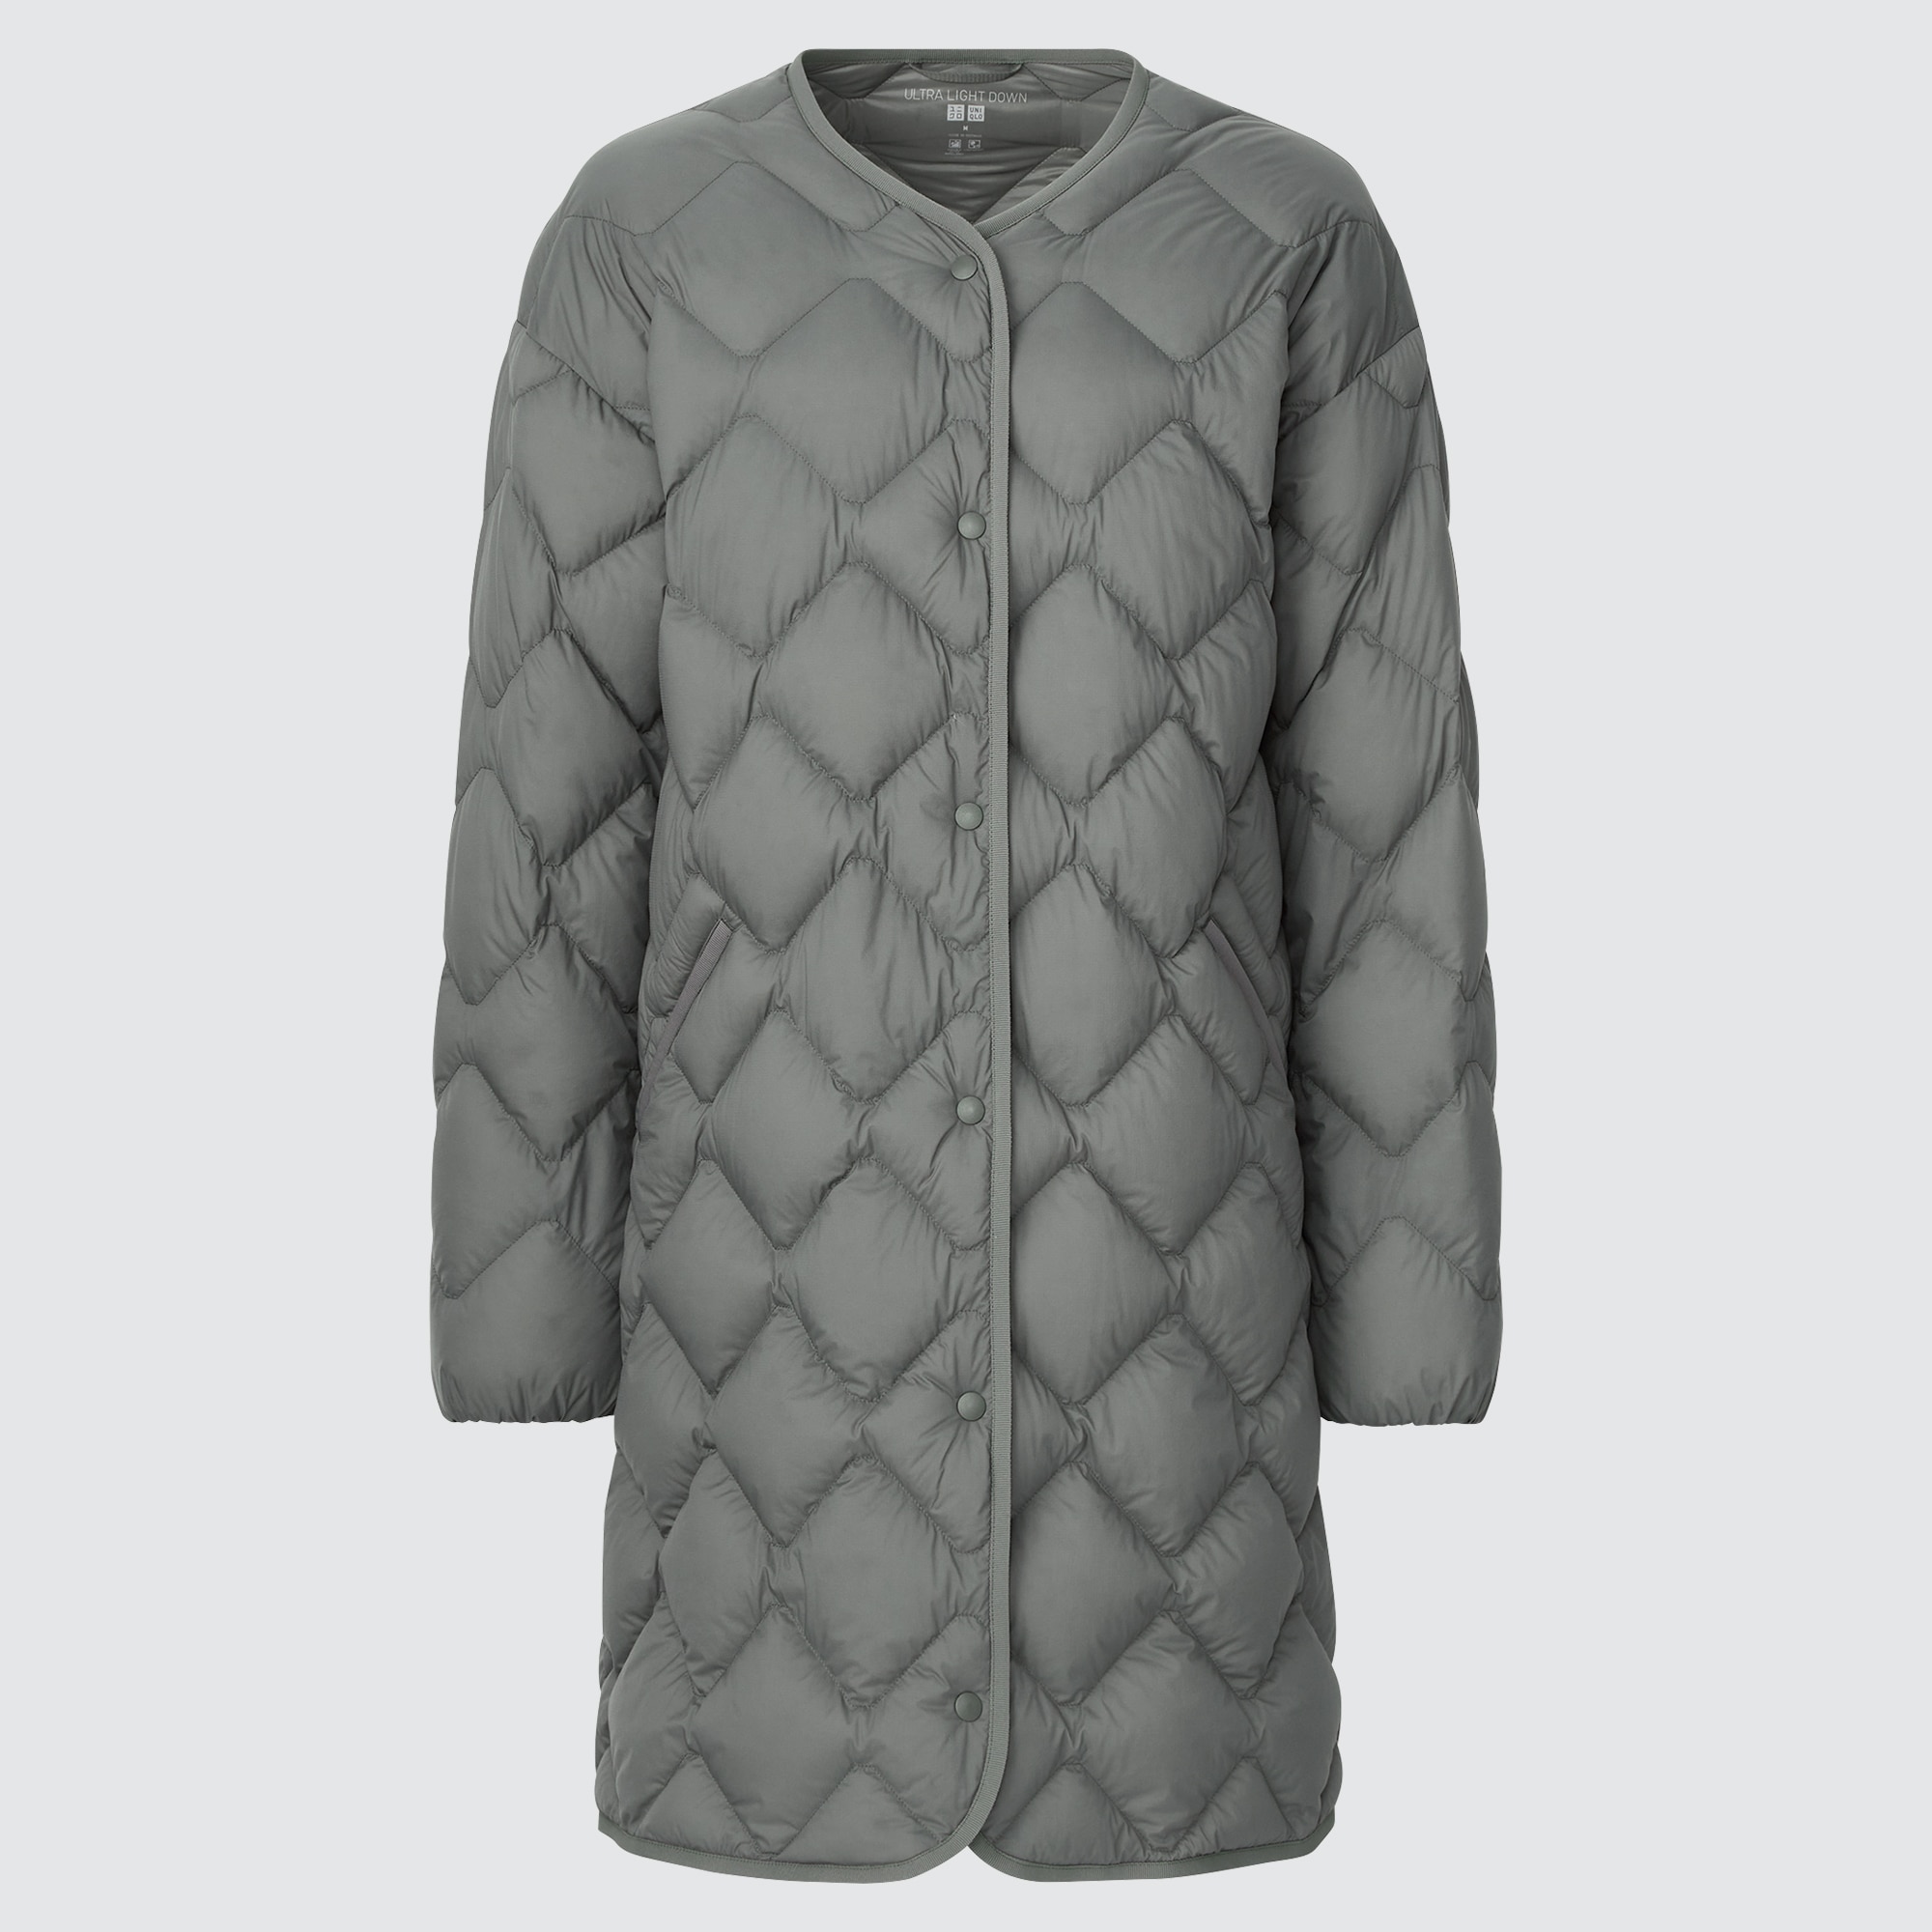 uniqlo quilted jacket